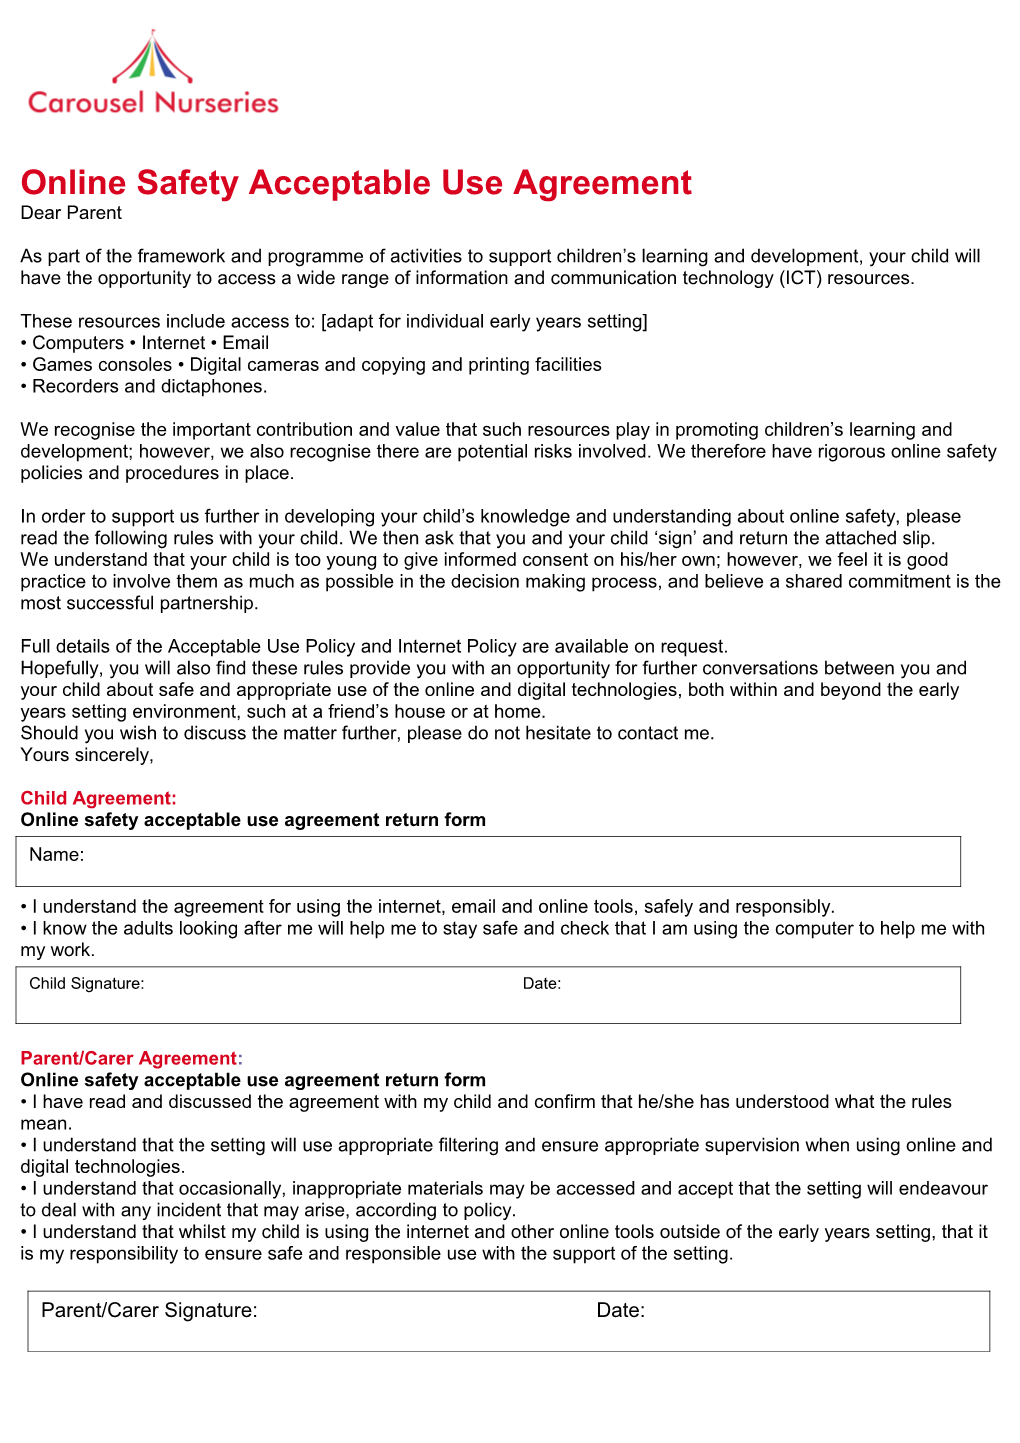 Online Safety Acceptable Use Agreement